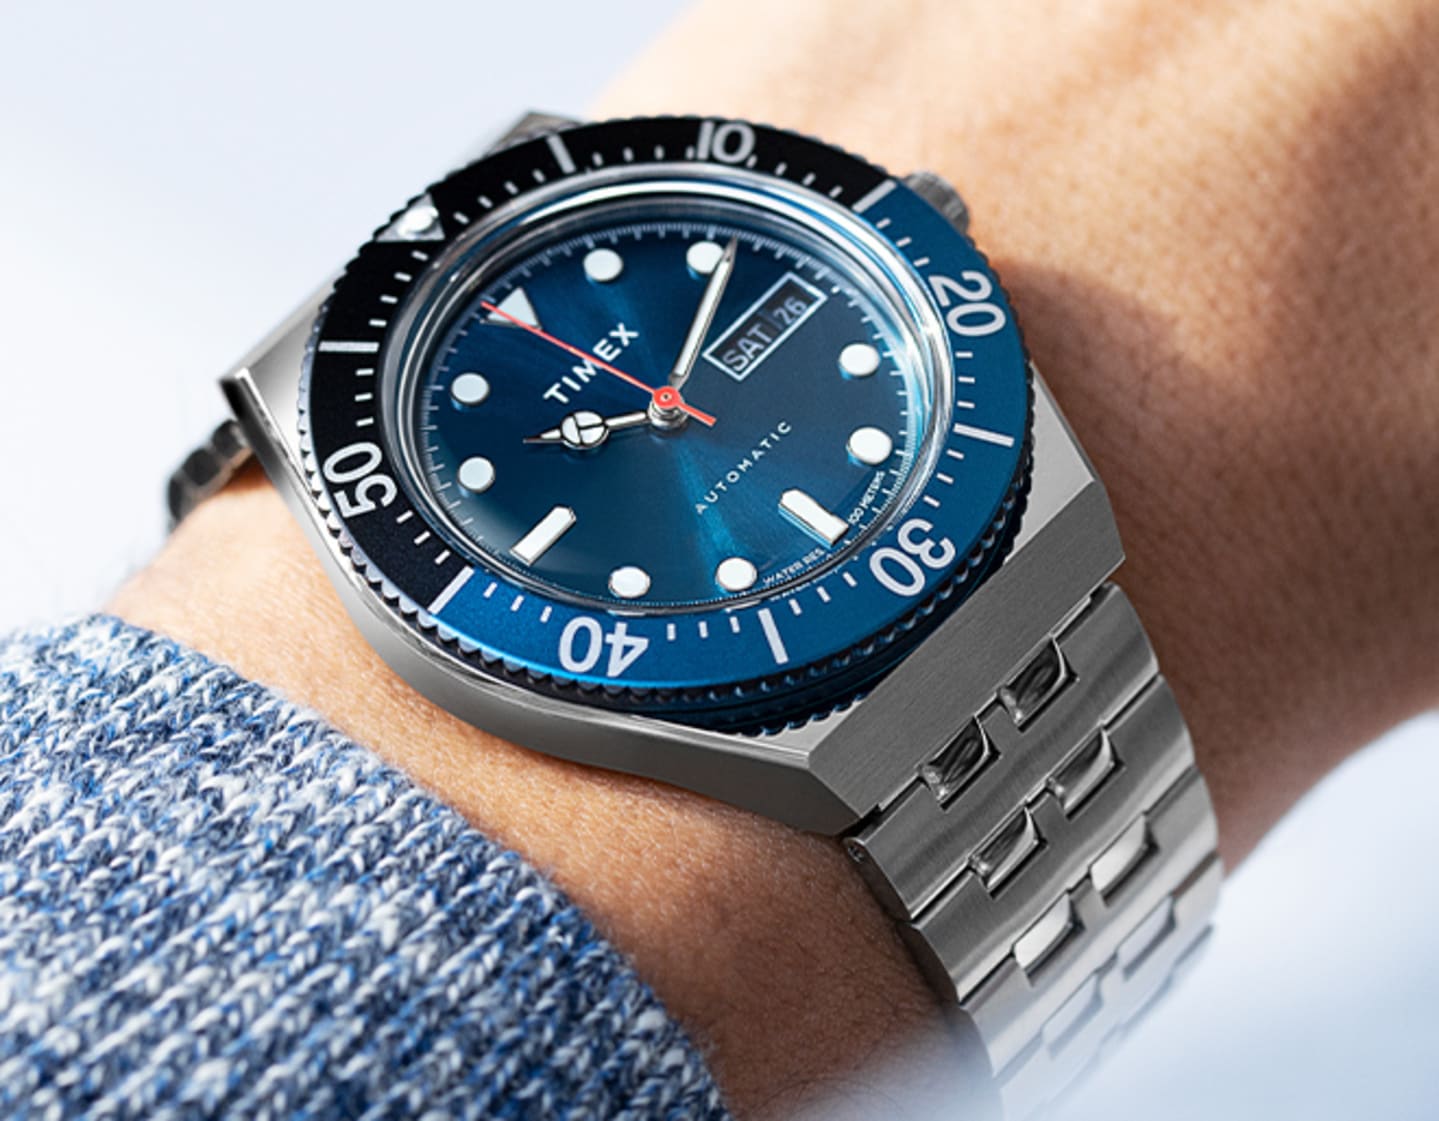 Watches from Timex | Digital, Analog, & Water Resistant Watches